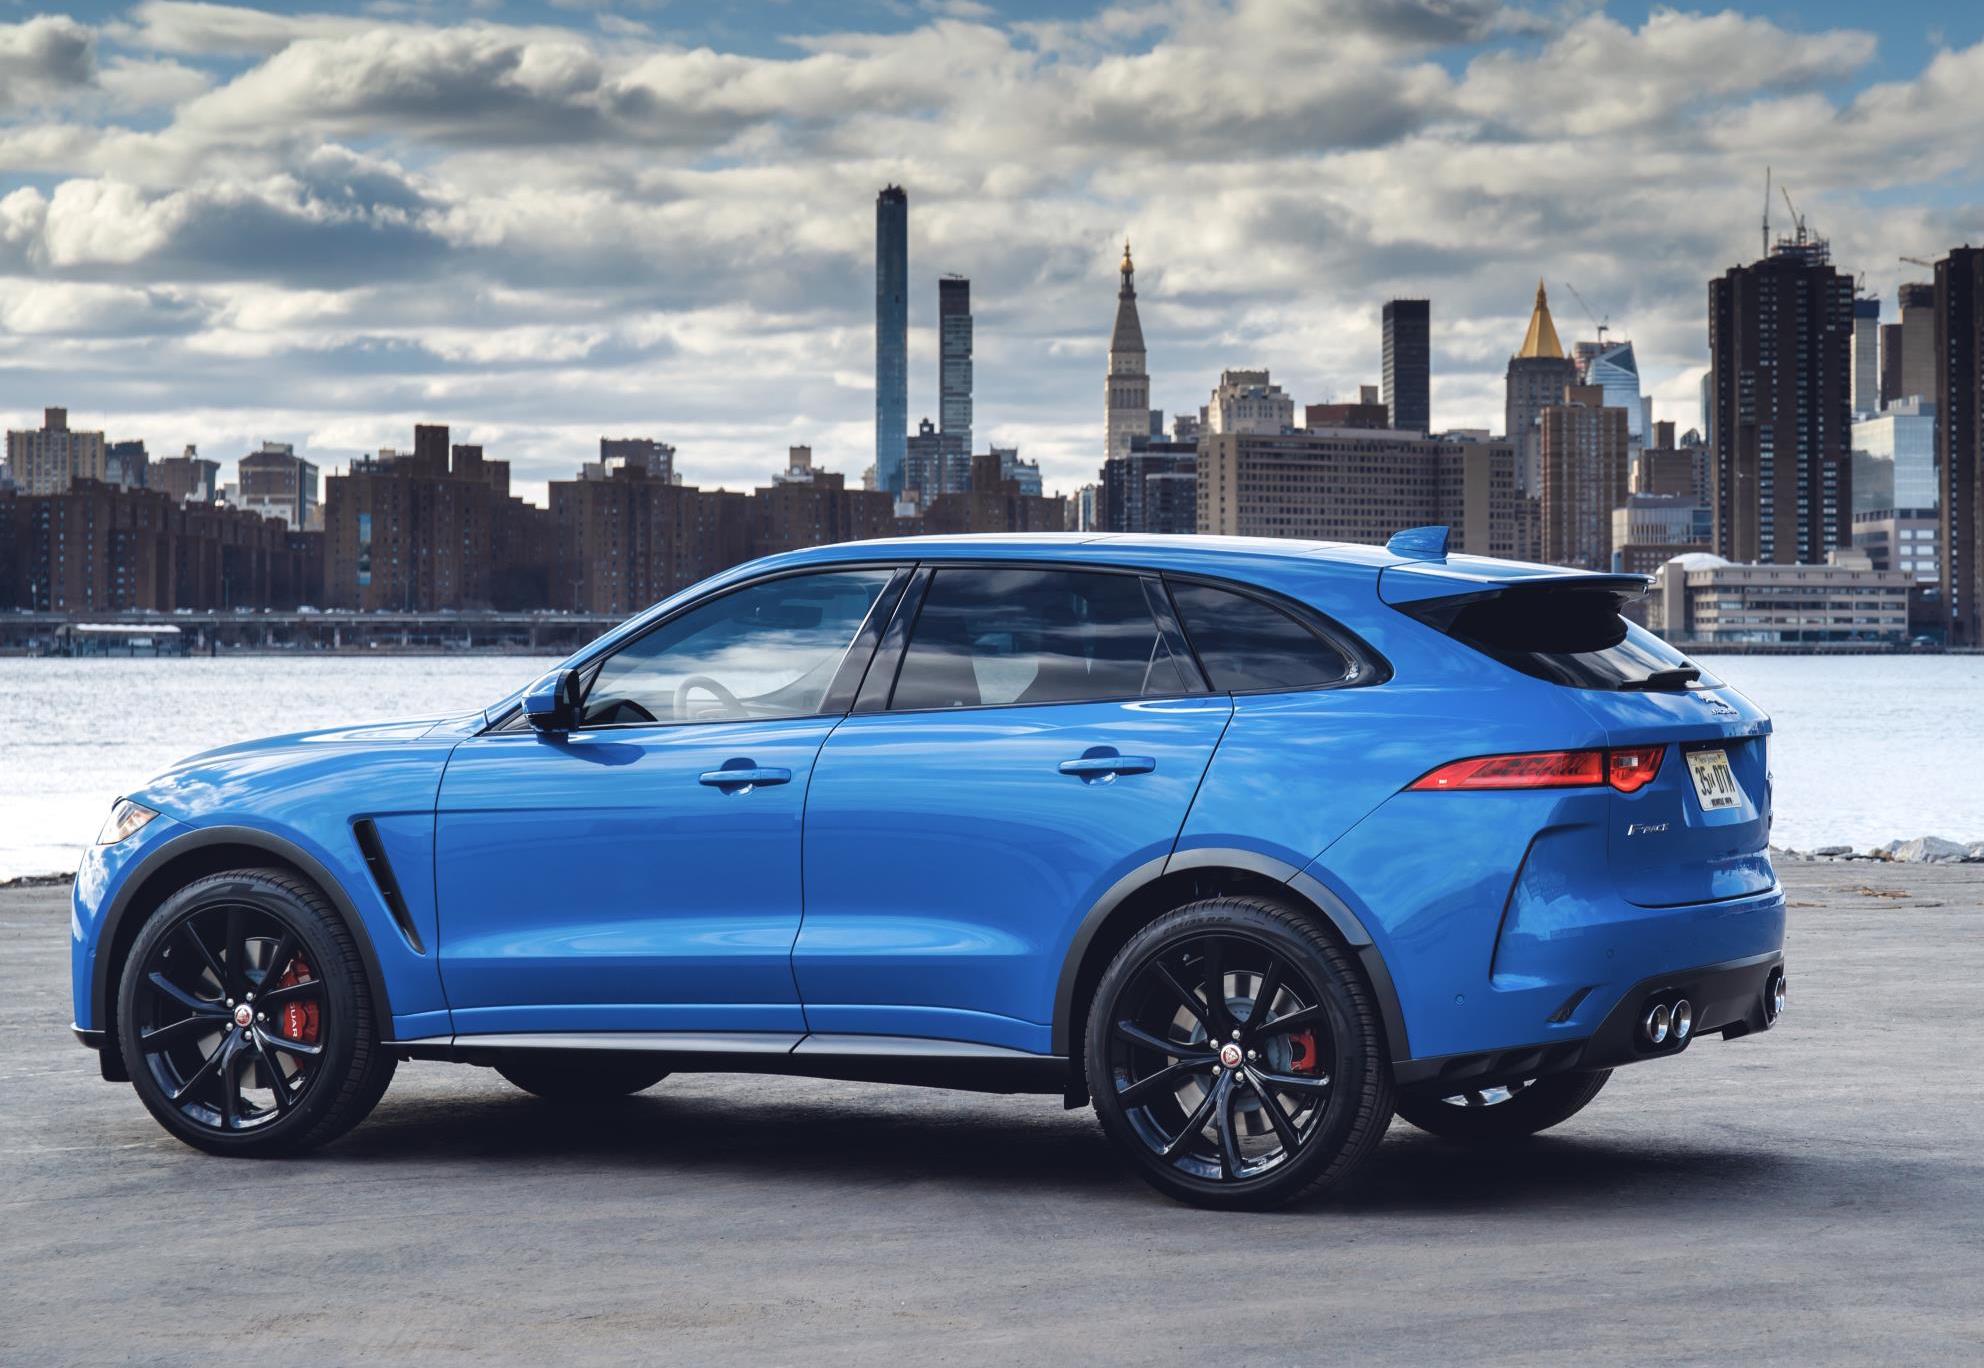 MY2019 Jaguar F-PACE announced, boosted safety & tech - PerformanceDrive